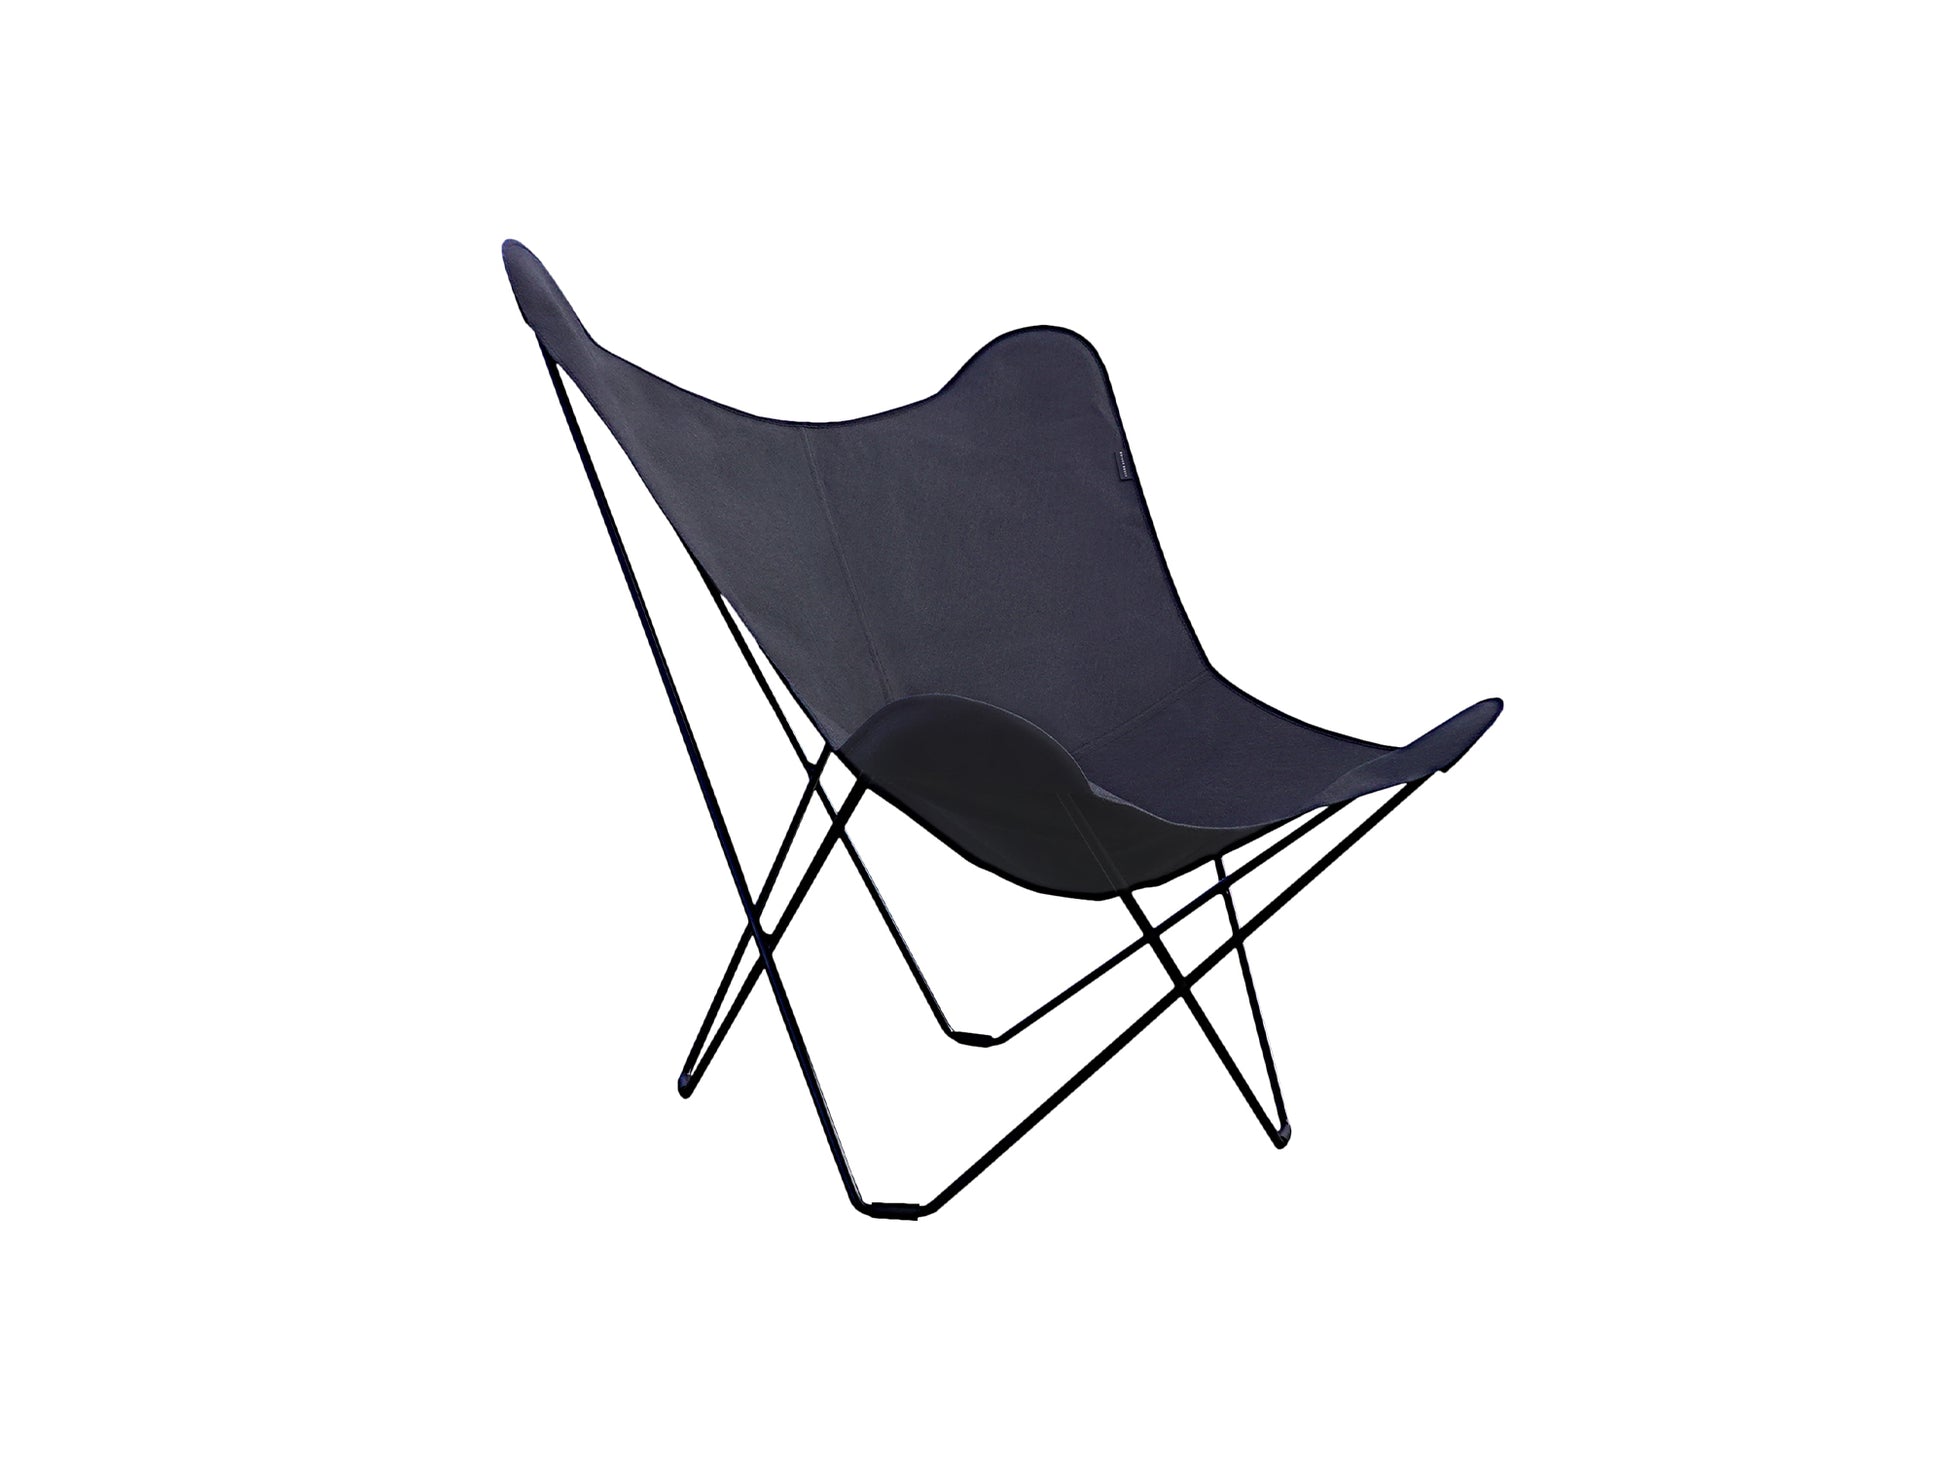 Sunshine Mariposa Butterfly Chair by Cuero - Zinc Coated Black Steel Frame / Charcoal Pique Cover